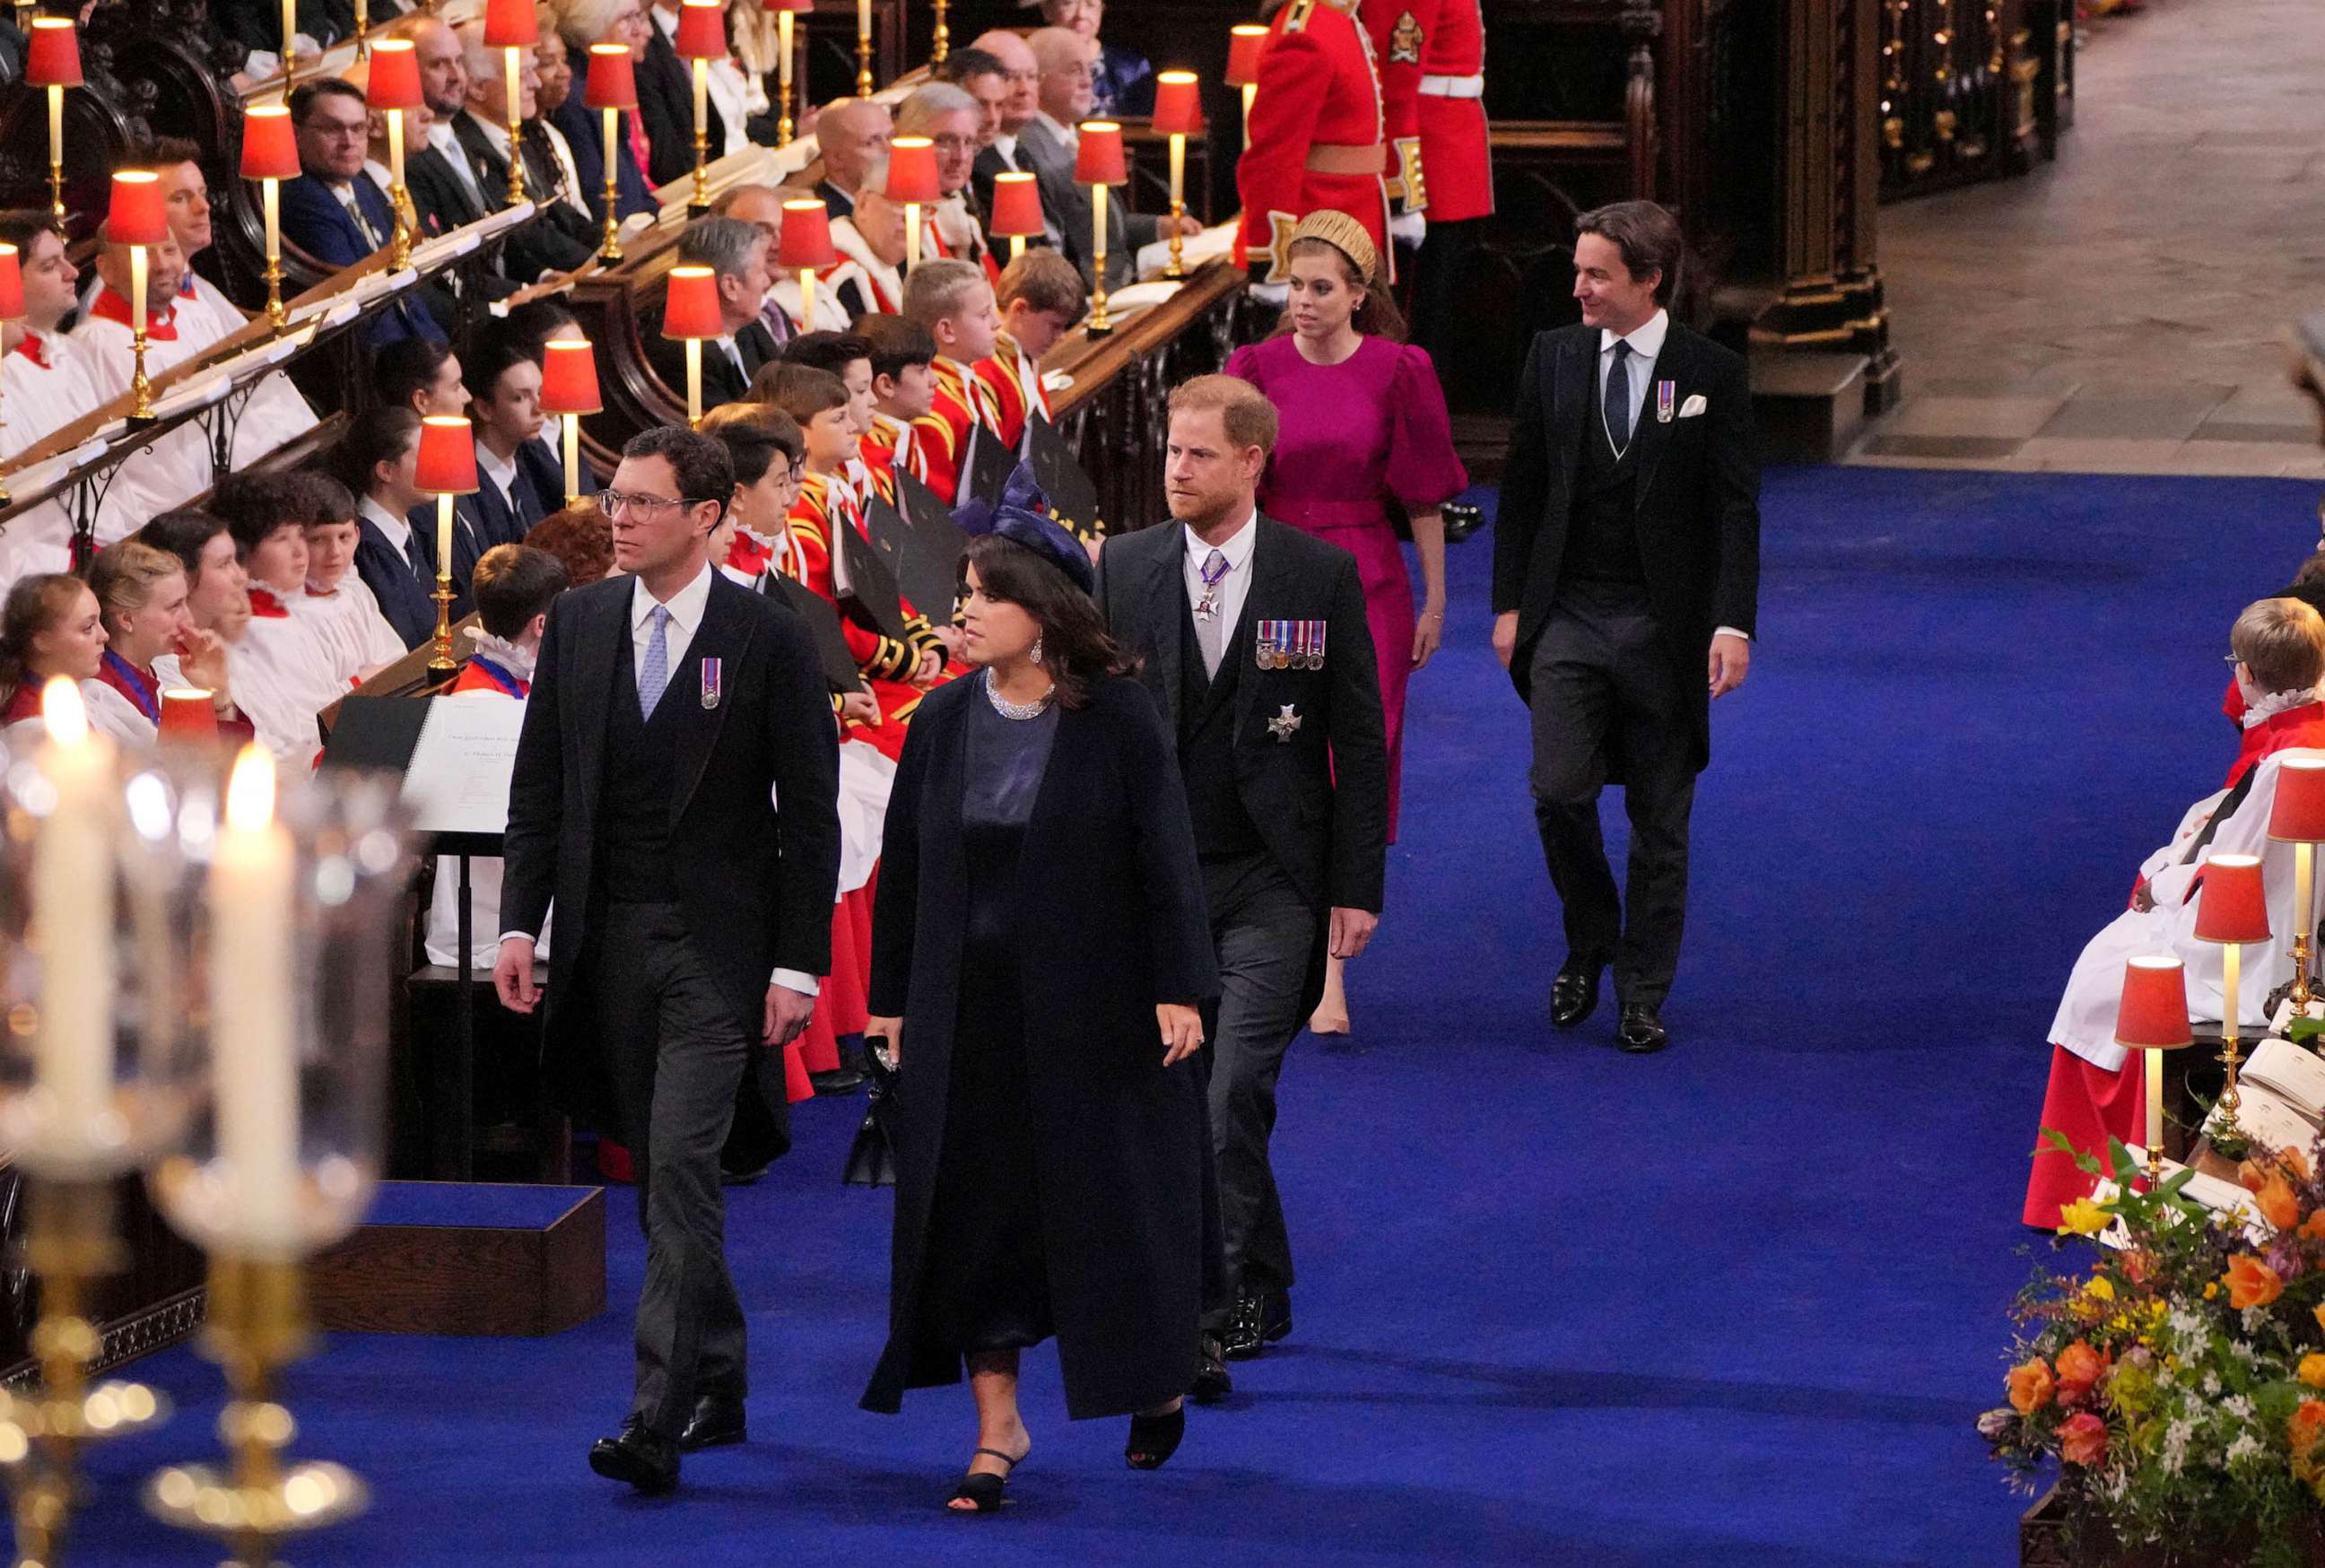 PHOTO: Princess Eugenie and Jack Brooksbank, the Duke of Sussex (centre) and Princess Beatrice and Edoardo Mapelli Mozzi at the coronation ceremony of King Charles III and Queen Camilla in Westminster Abbey, London, May 6, 2023.